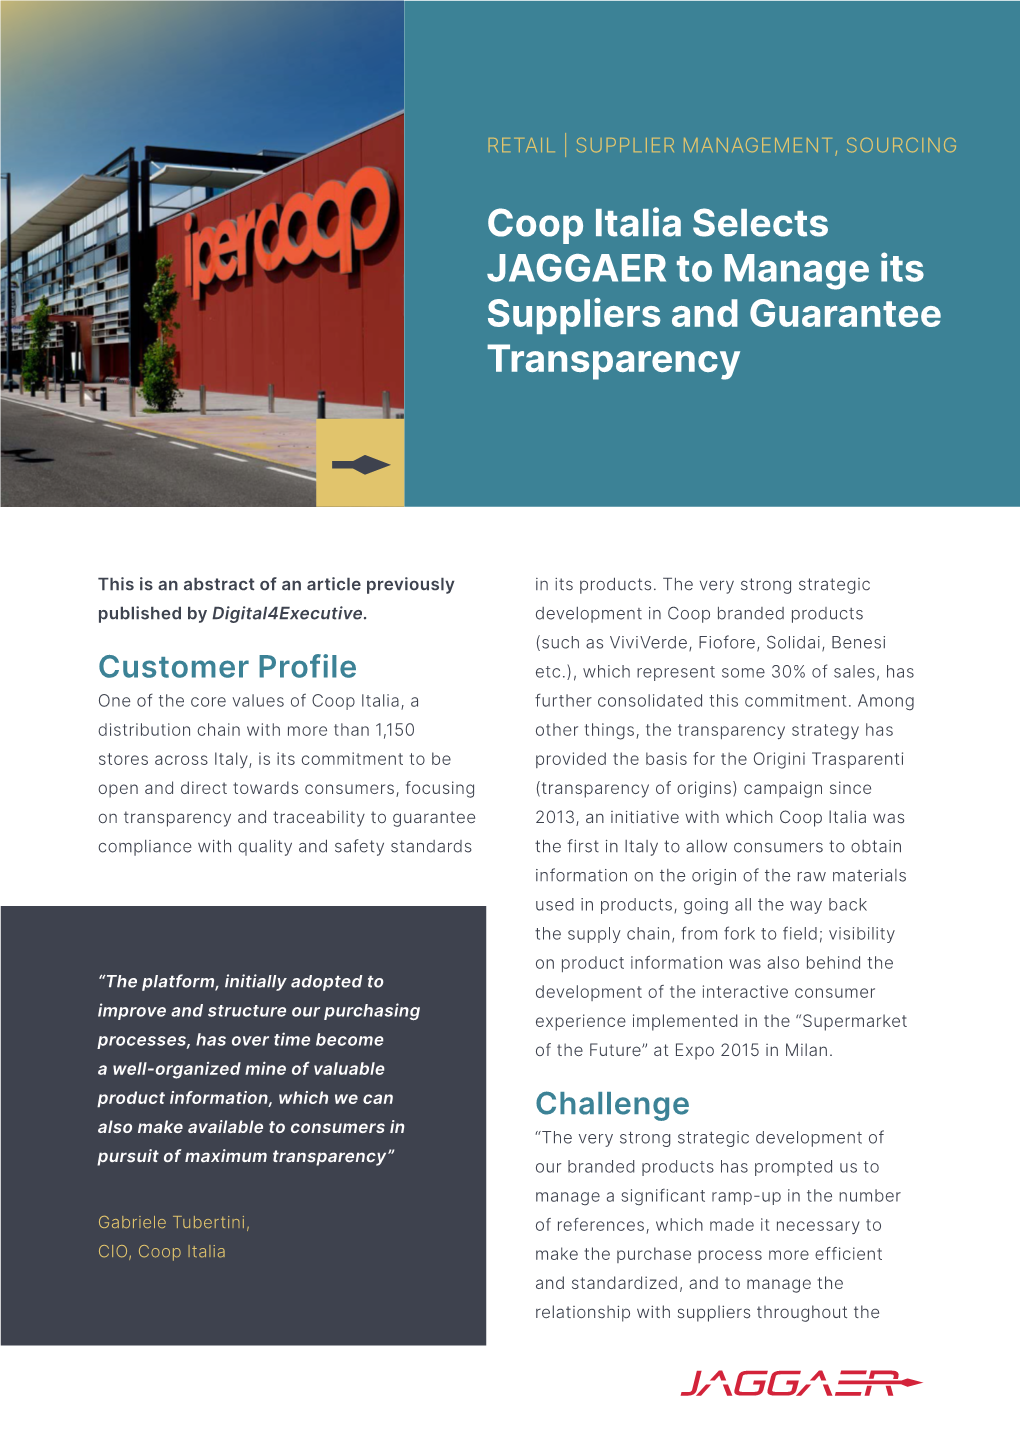 Coop Italia Selects JAGGAER to Manage Its Suppliers and Guarantee Transparency